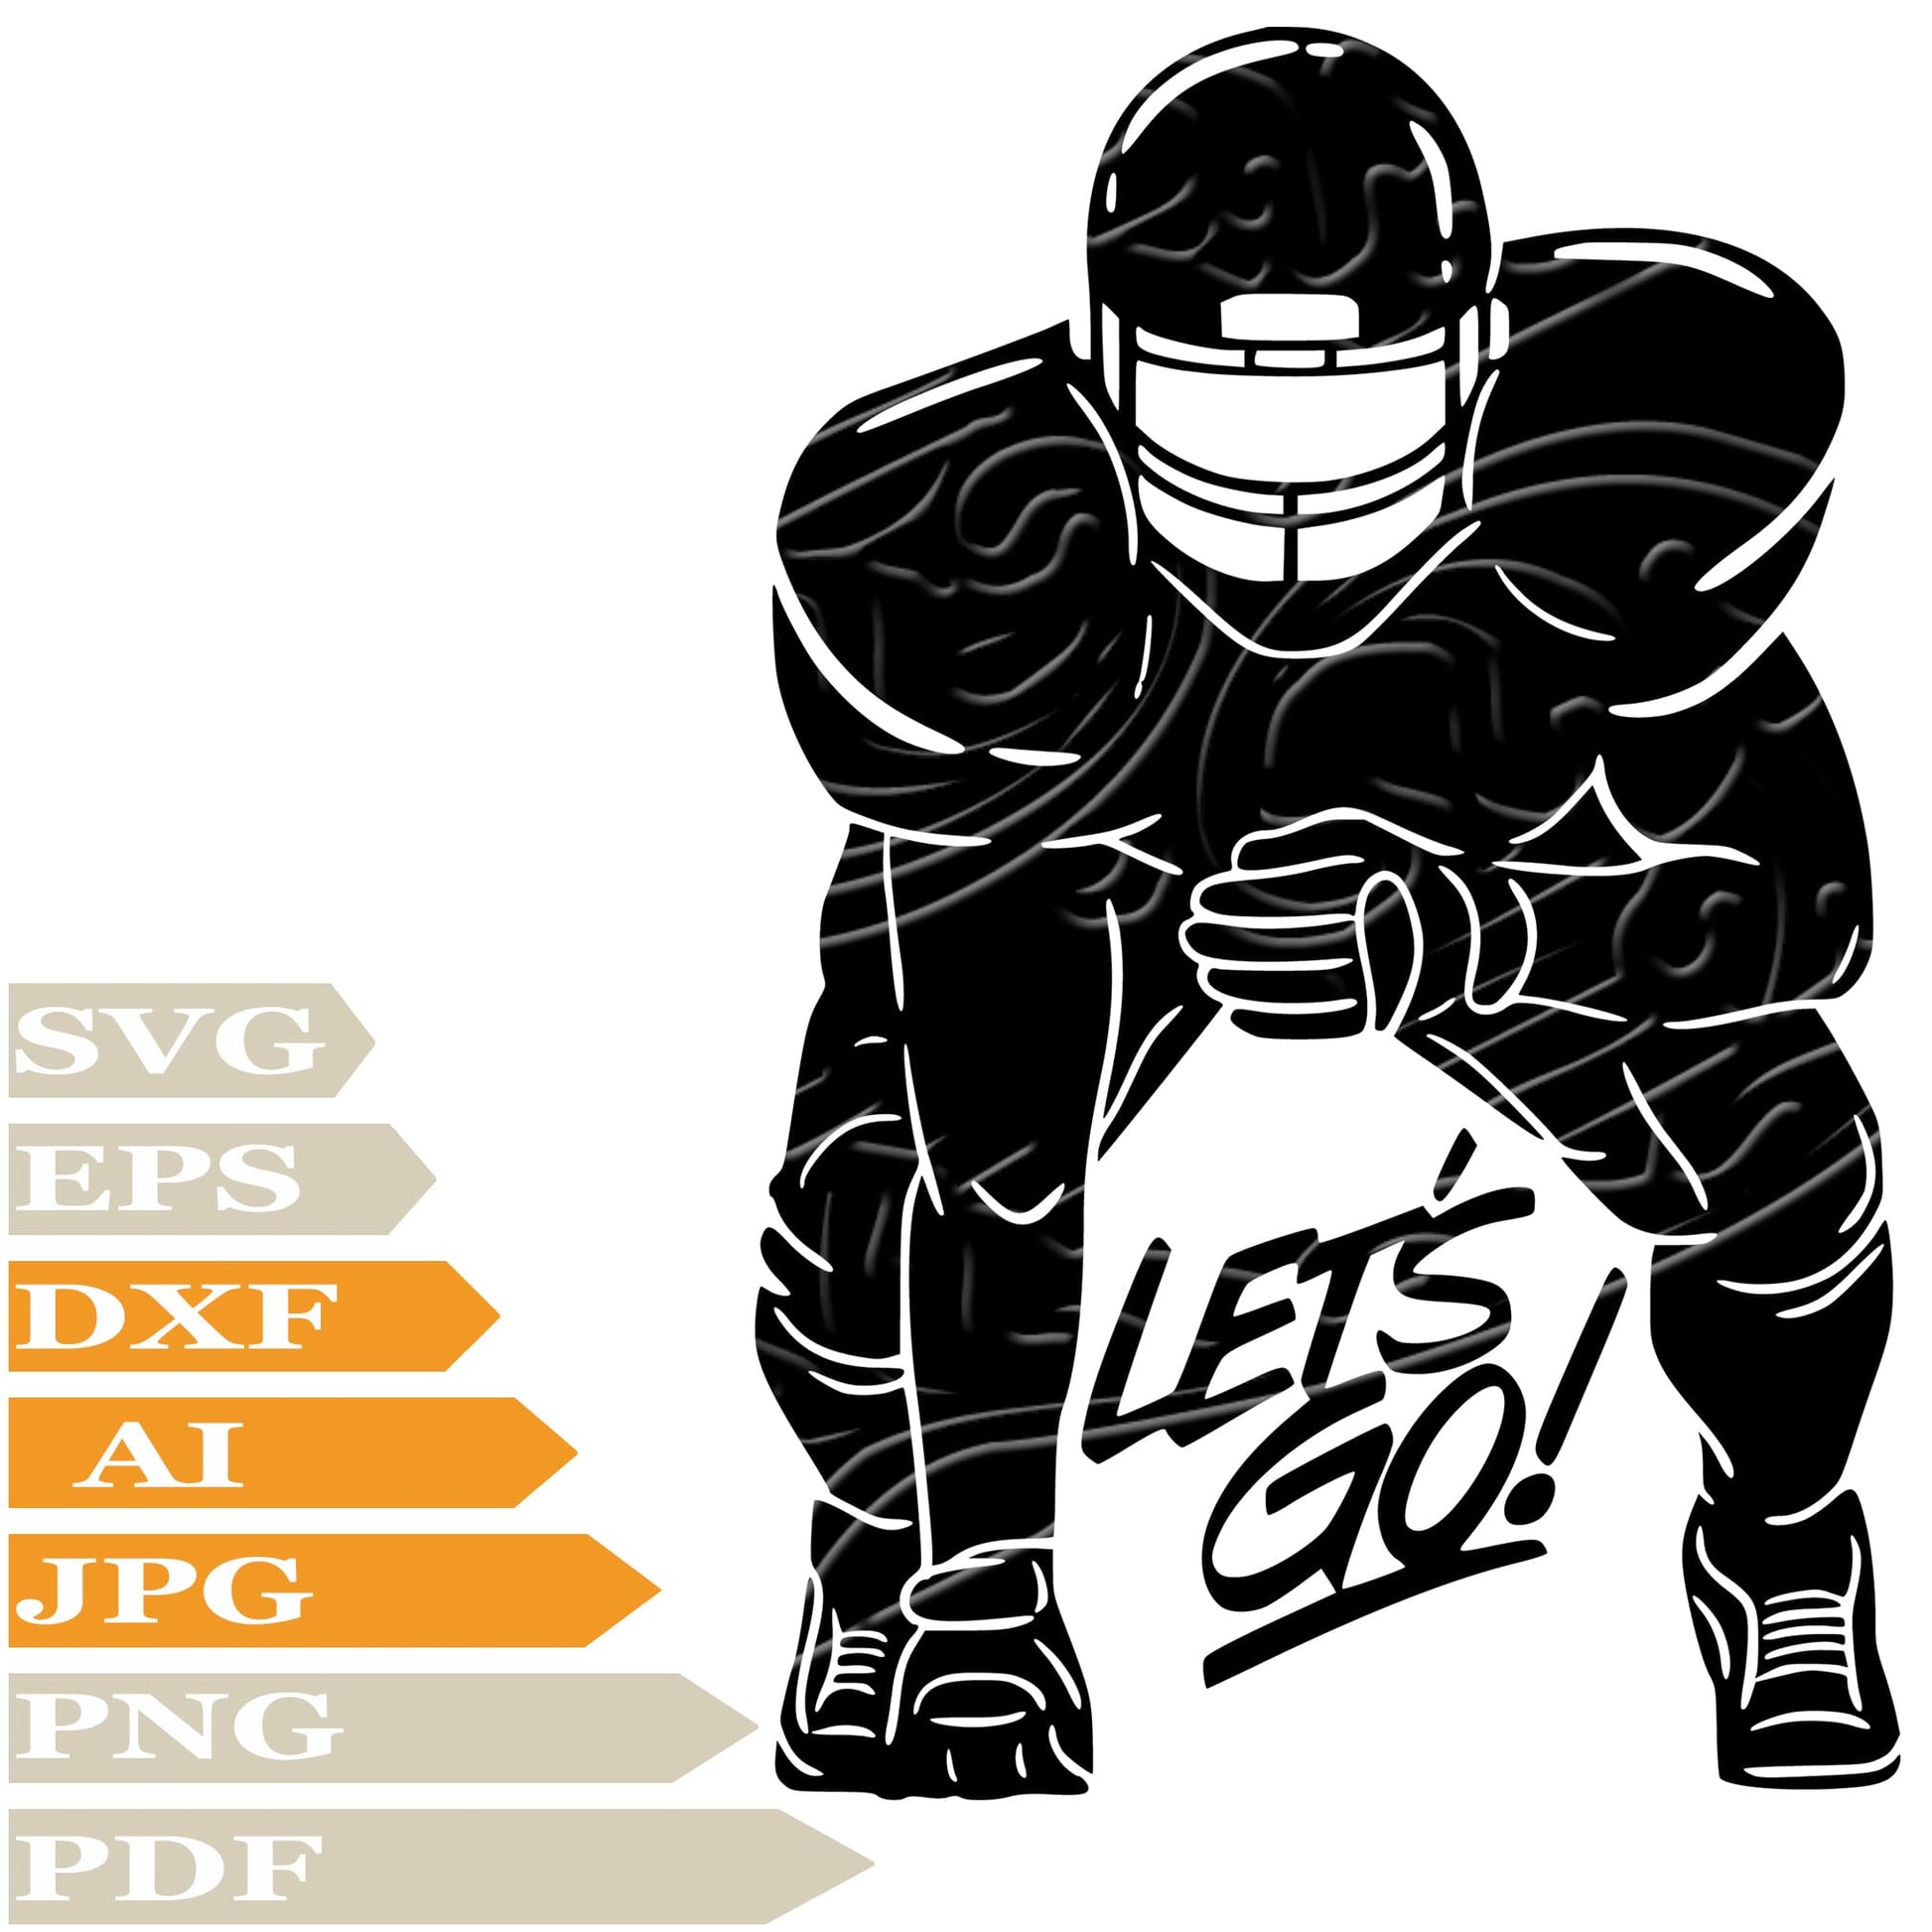 American Football Player, Football Player Let's Go Svg File, Image Cut, Png, For Tattoo, Silhouette, Digital Vector Download, Cut File, Clipart, For Cricut